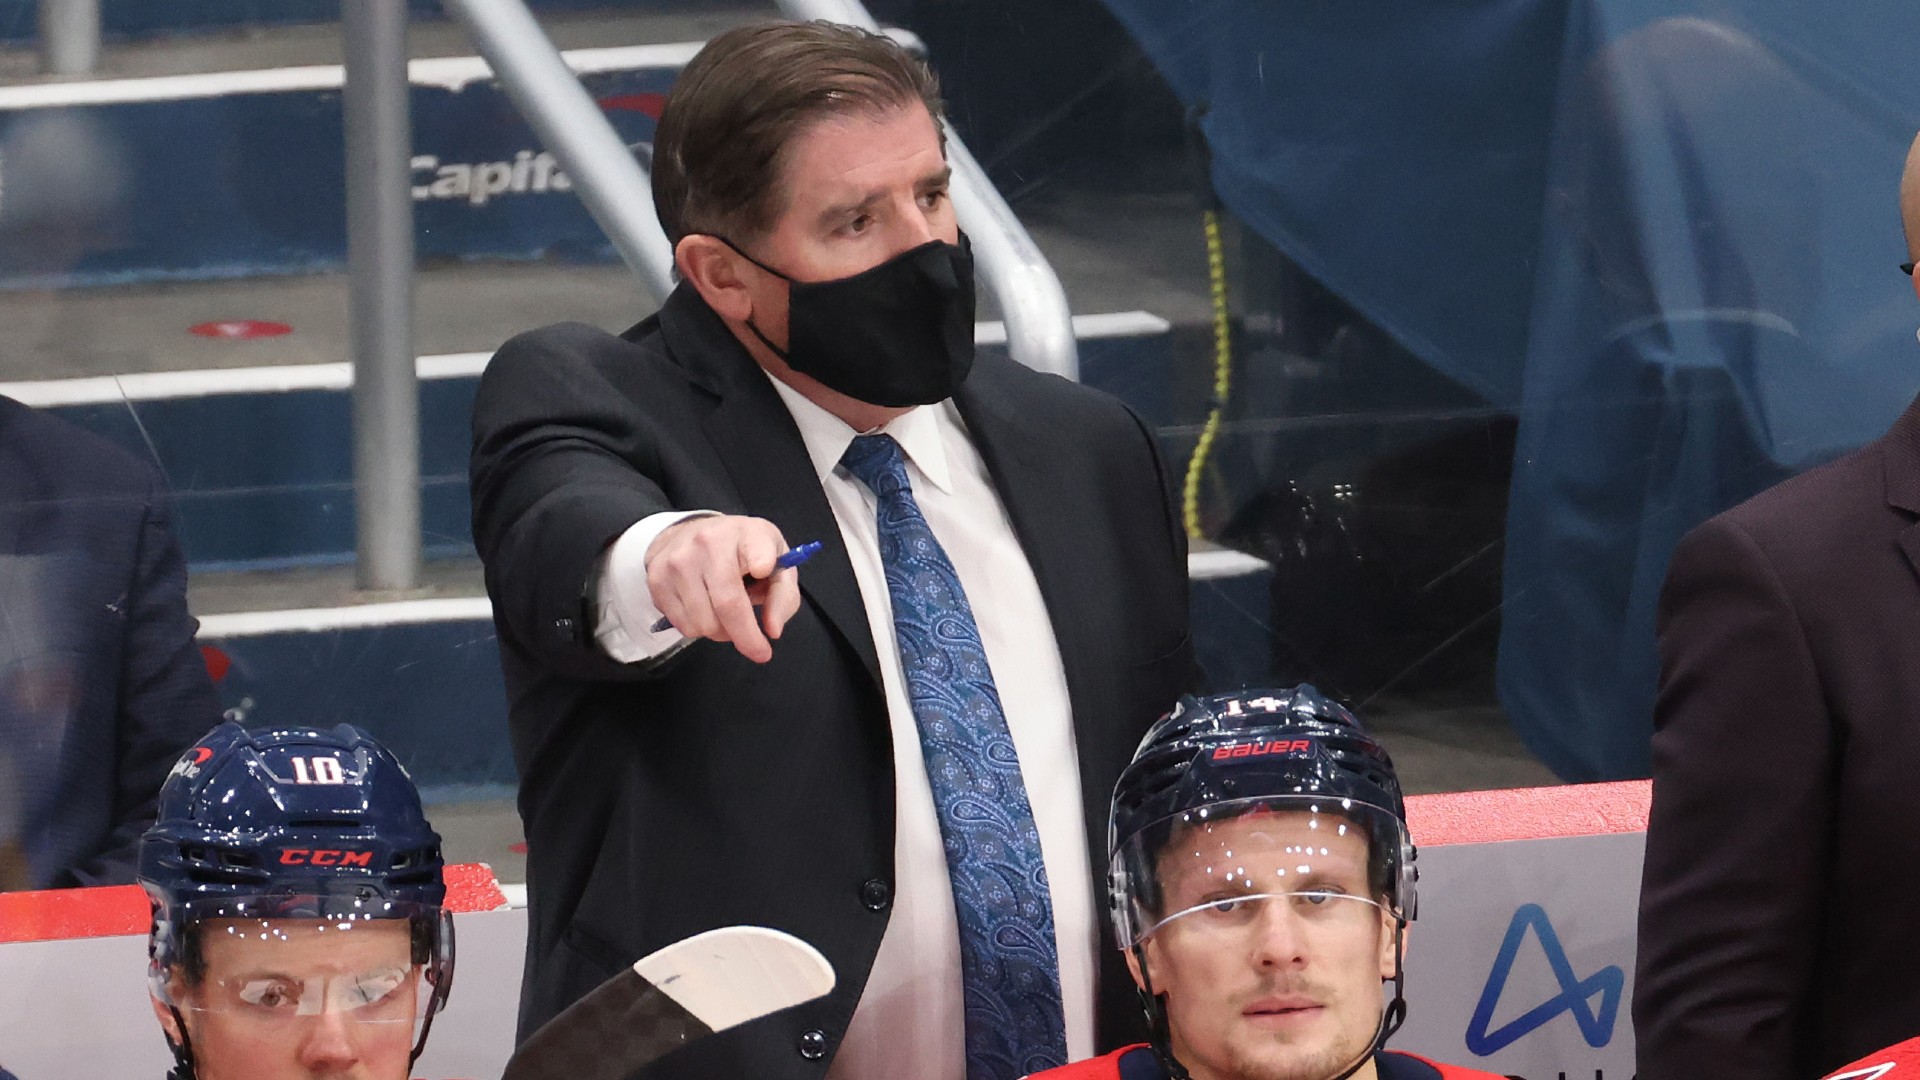 Capitals Coach Was Headed for Beer League Hockey Before Realizing Dream